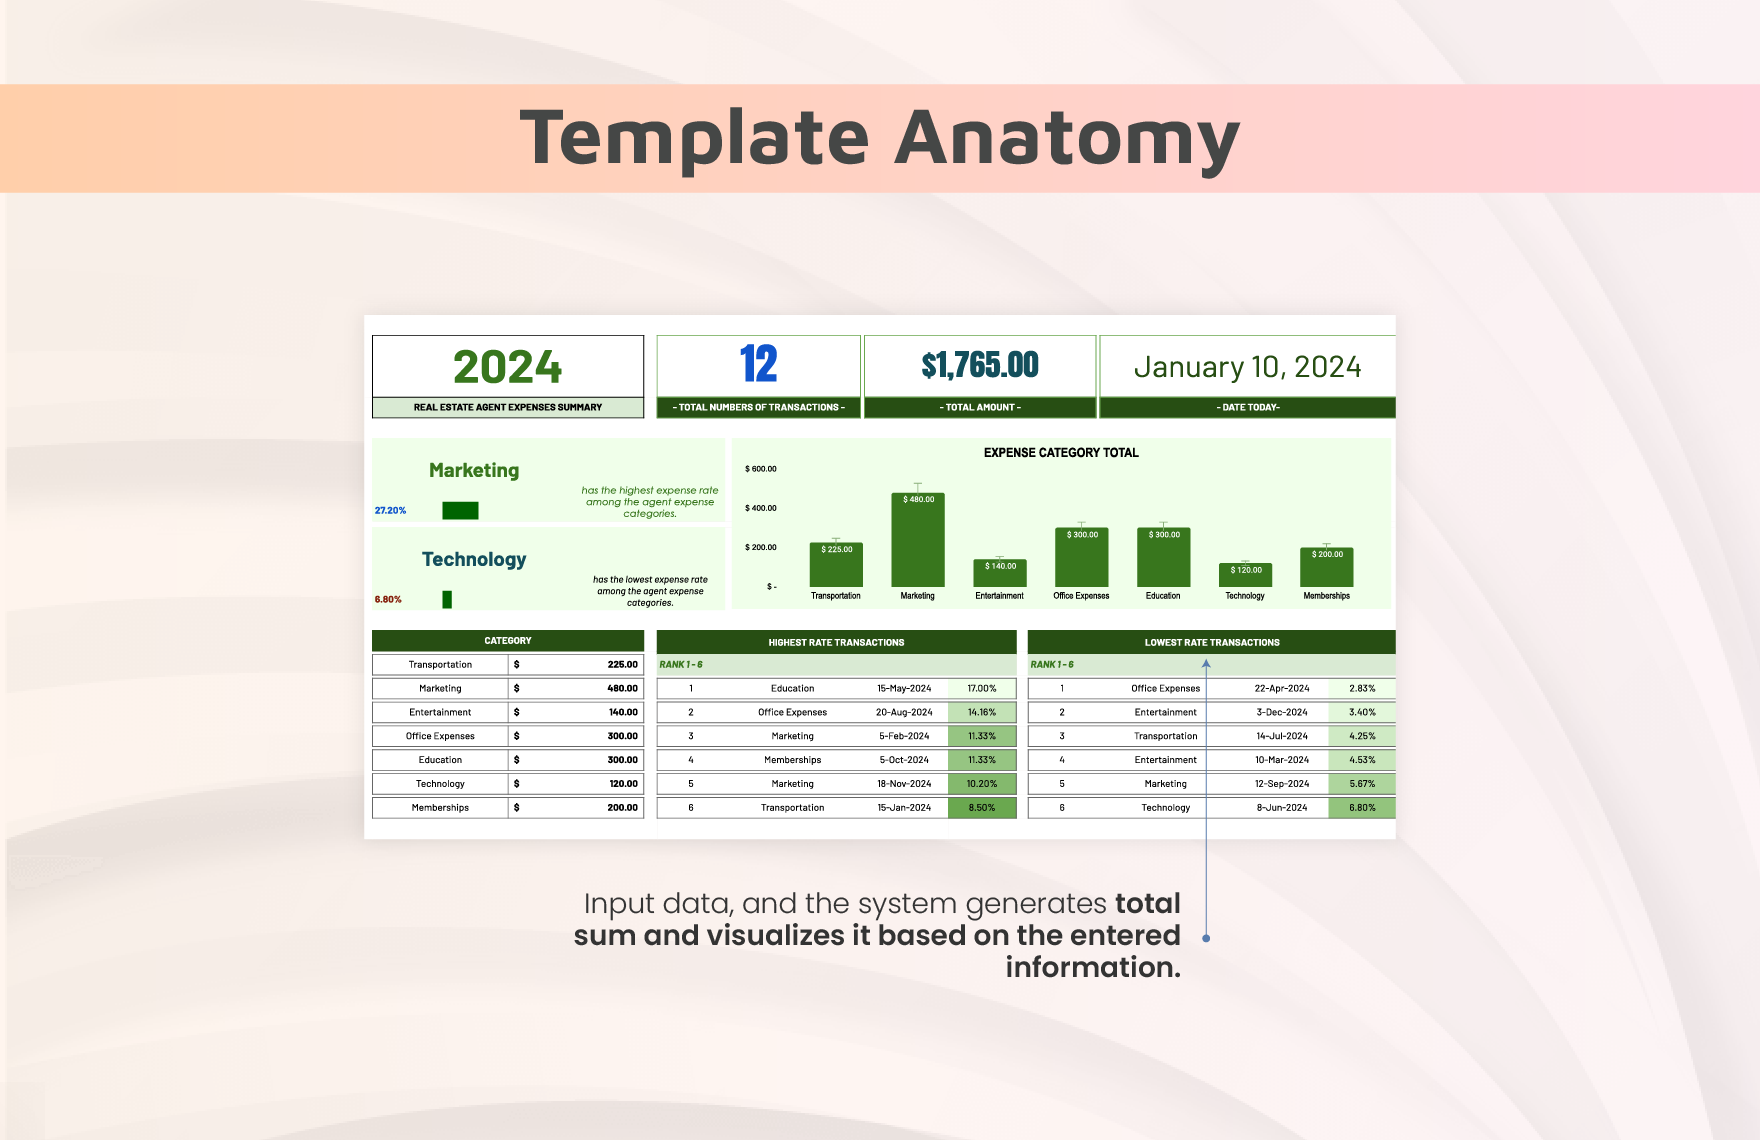 Real Estate Agent Expenses Template